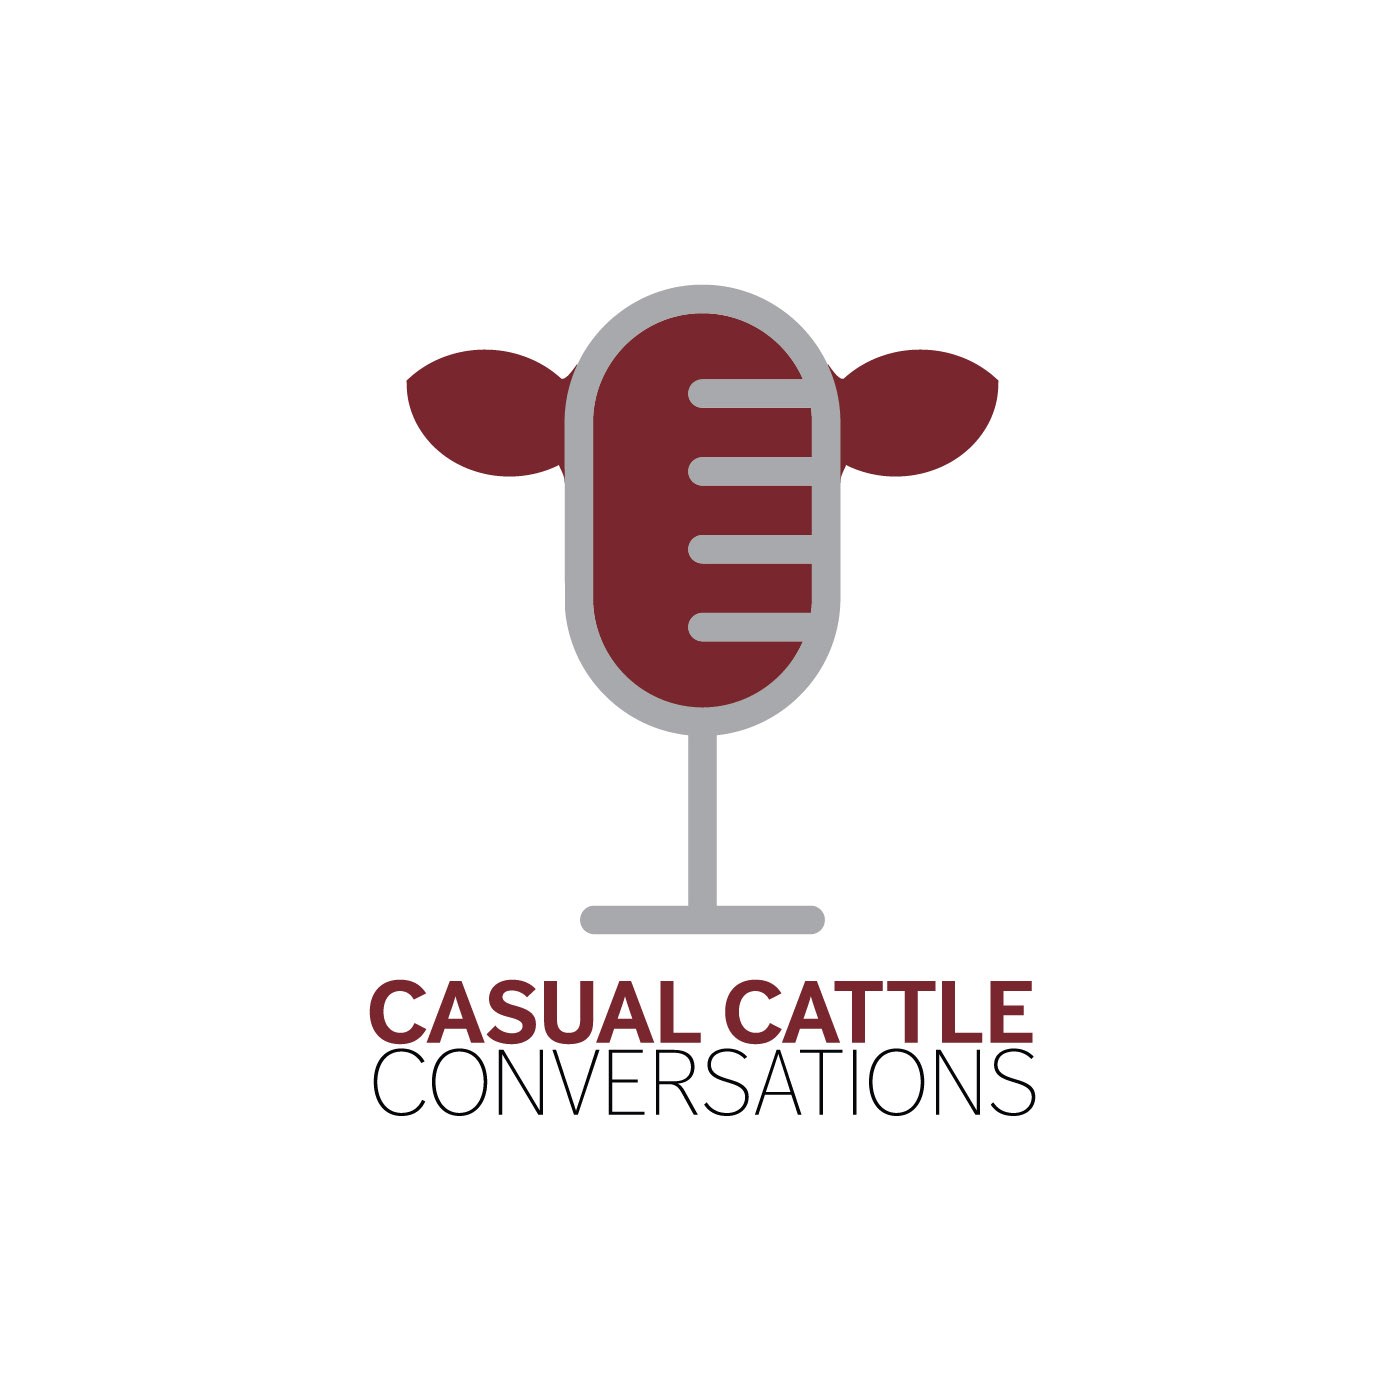 Casual Cattle Conversations